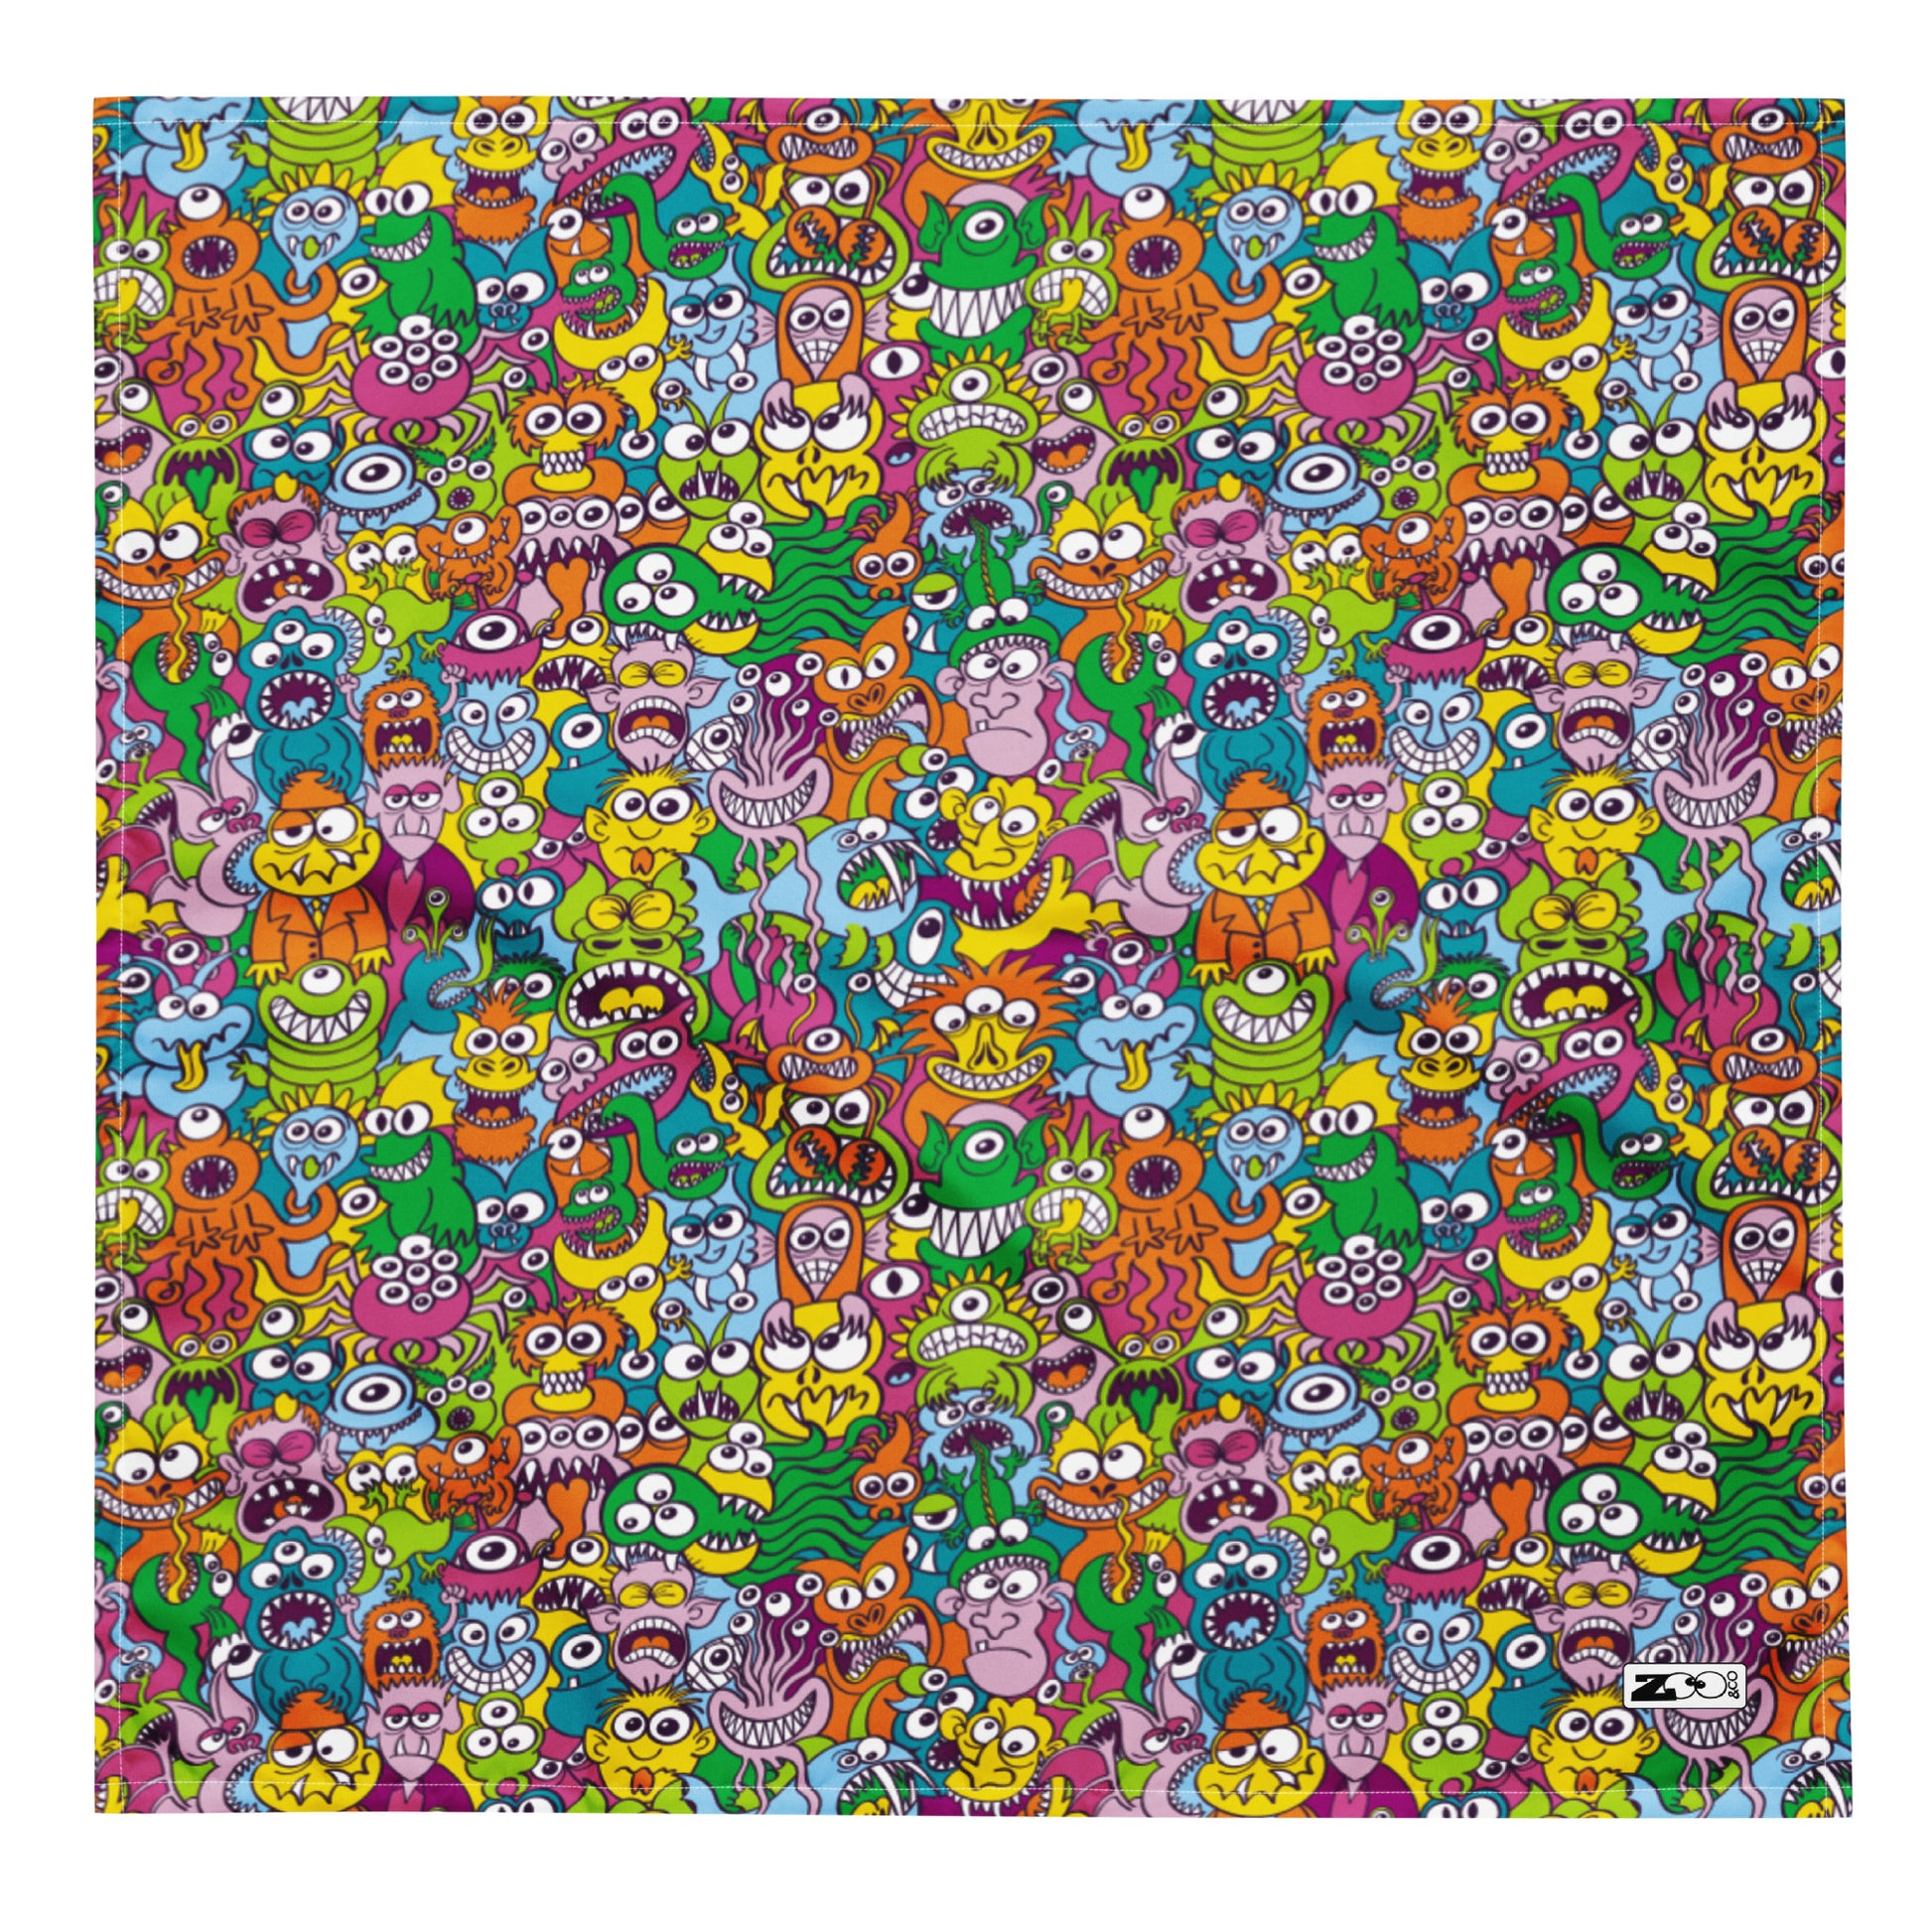 Terrific Halloween creatures ready for a horror movie All-over print bandana. Large size